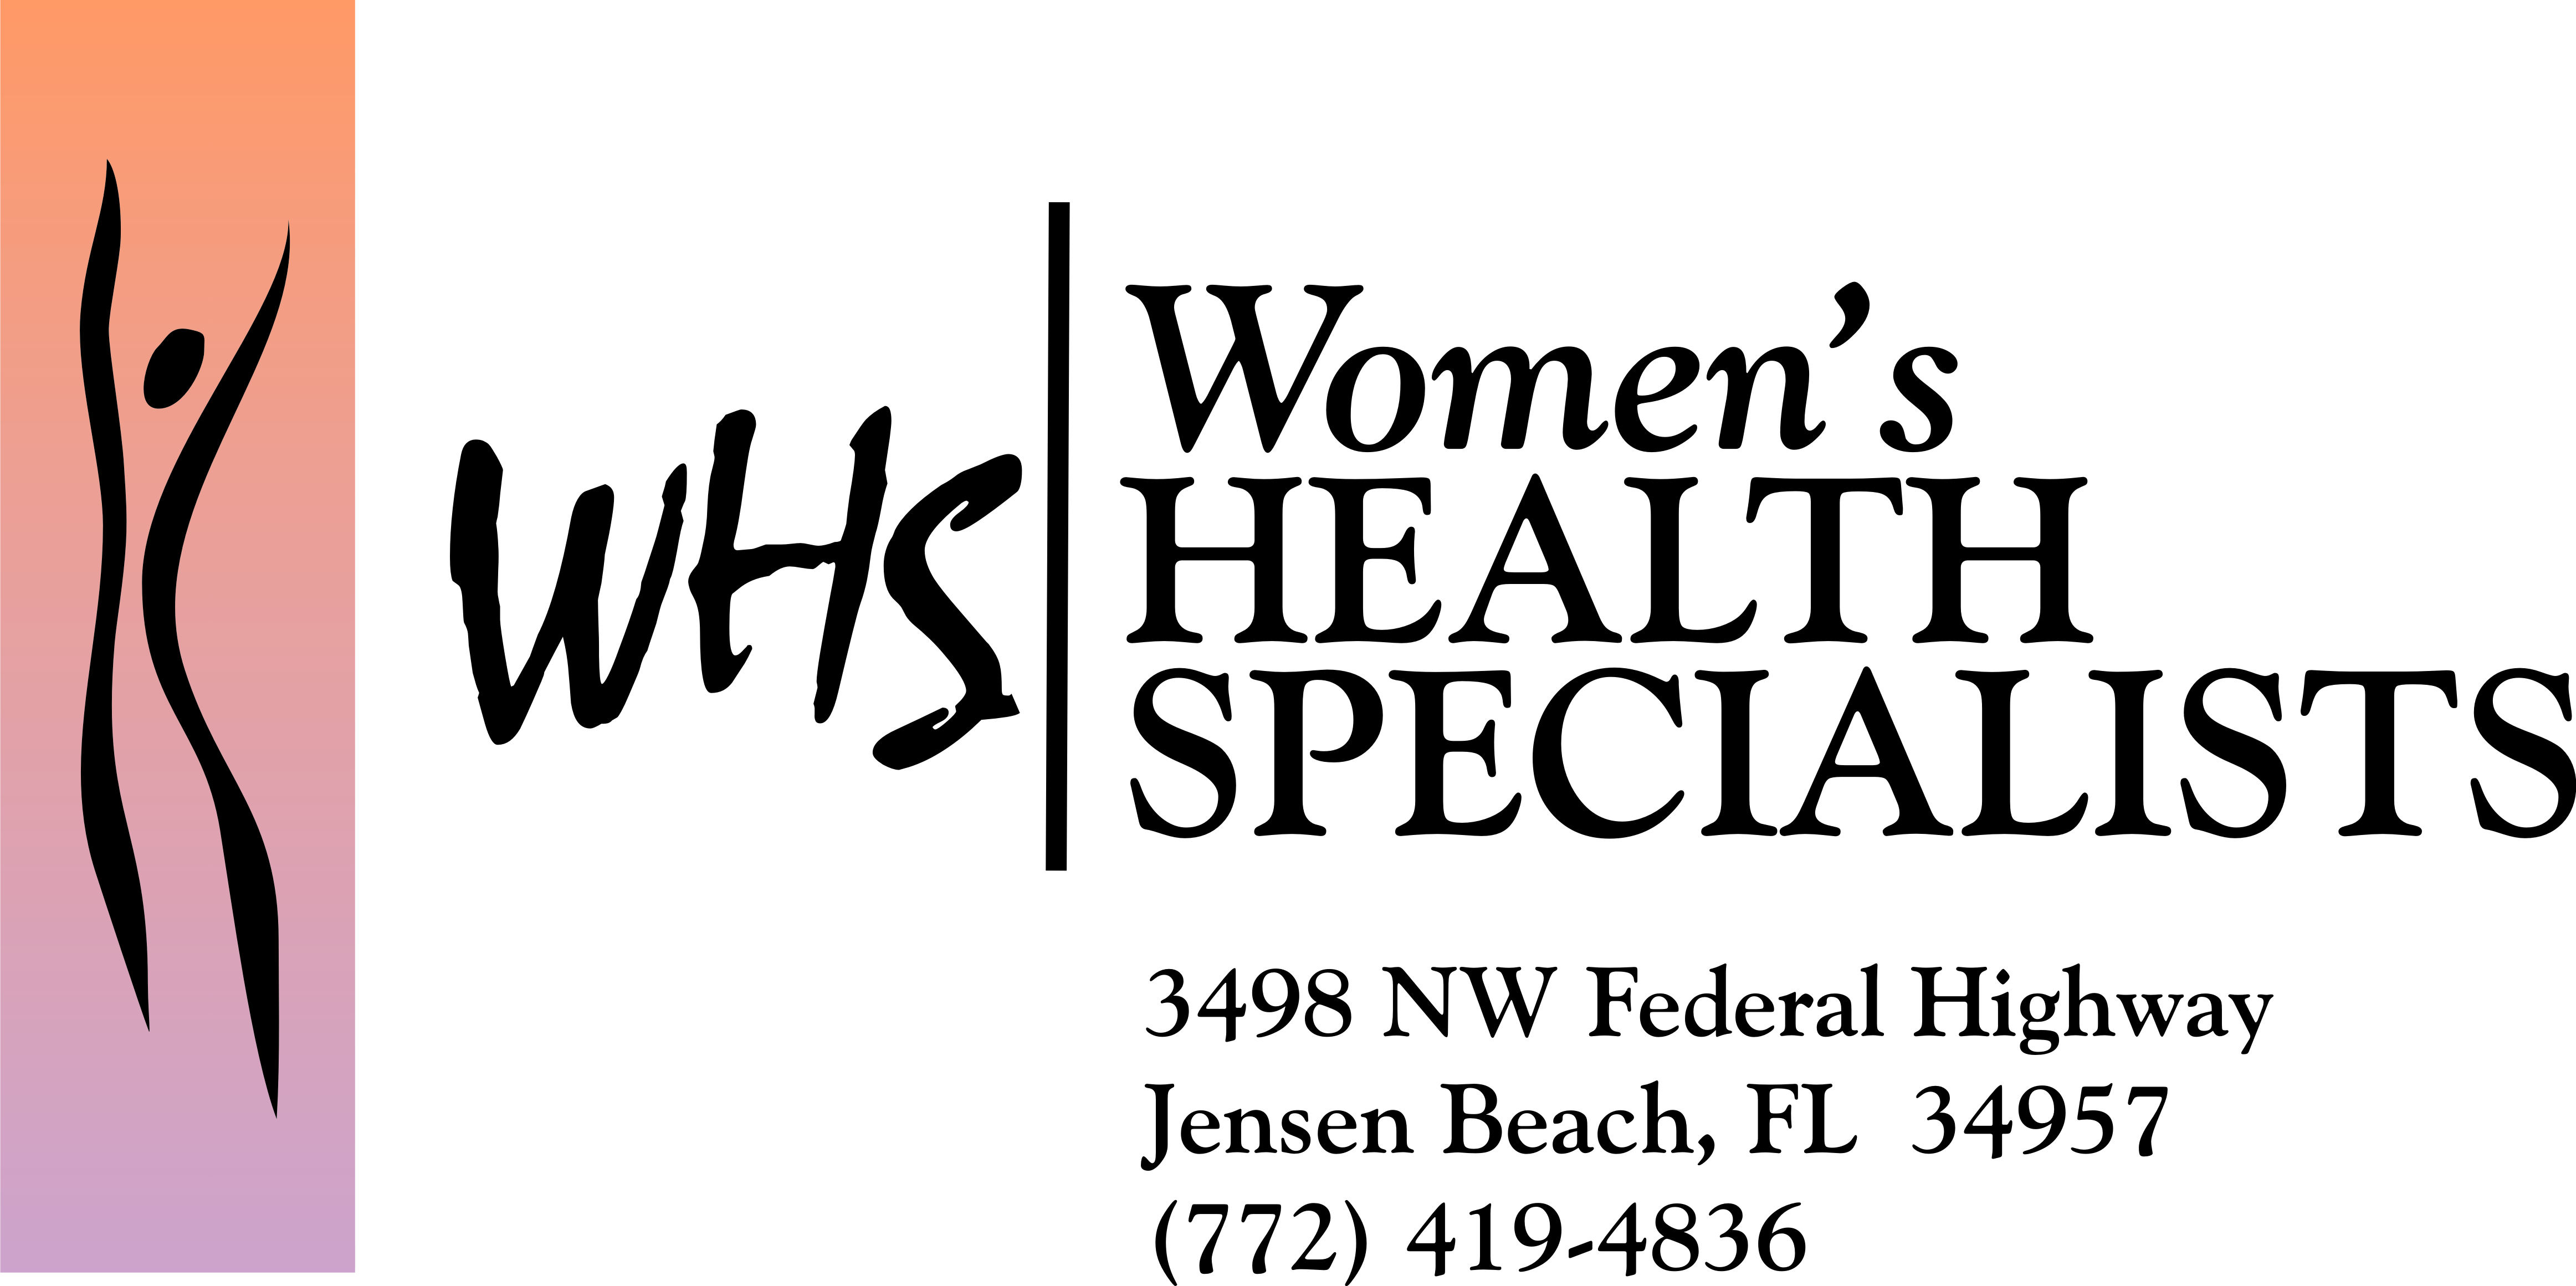 Women's Health Specialists Known and Trusted by Thousands